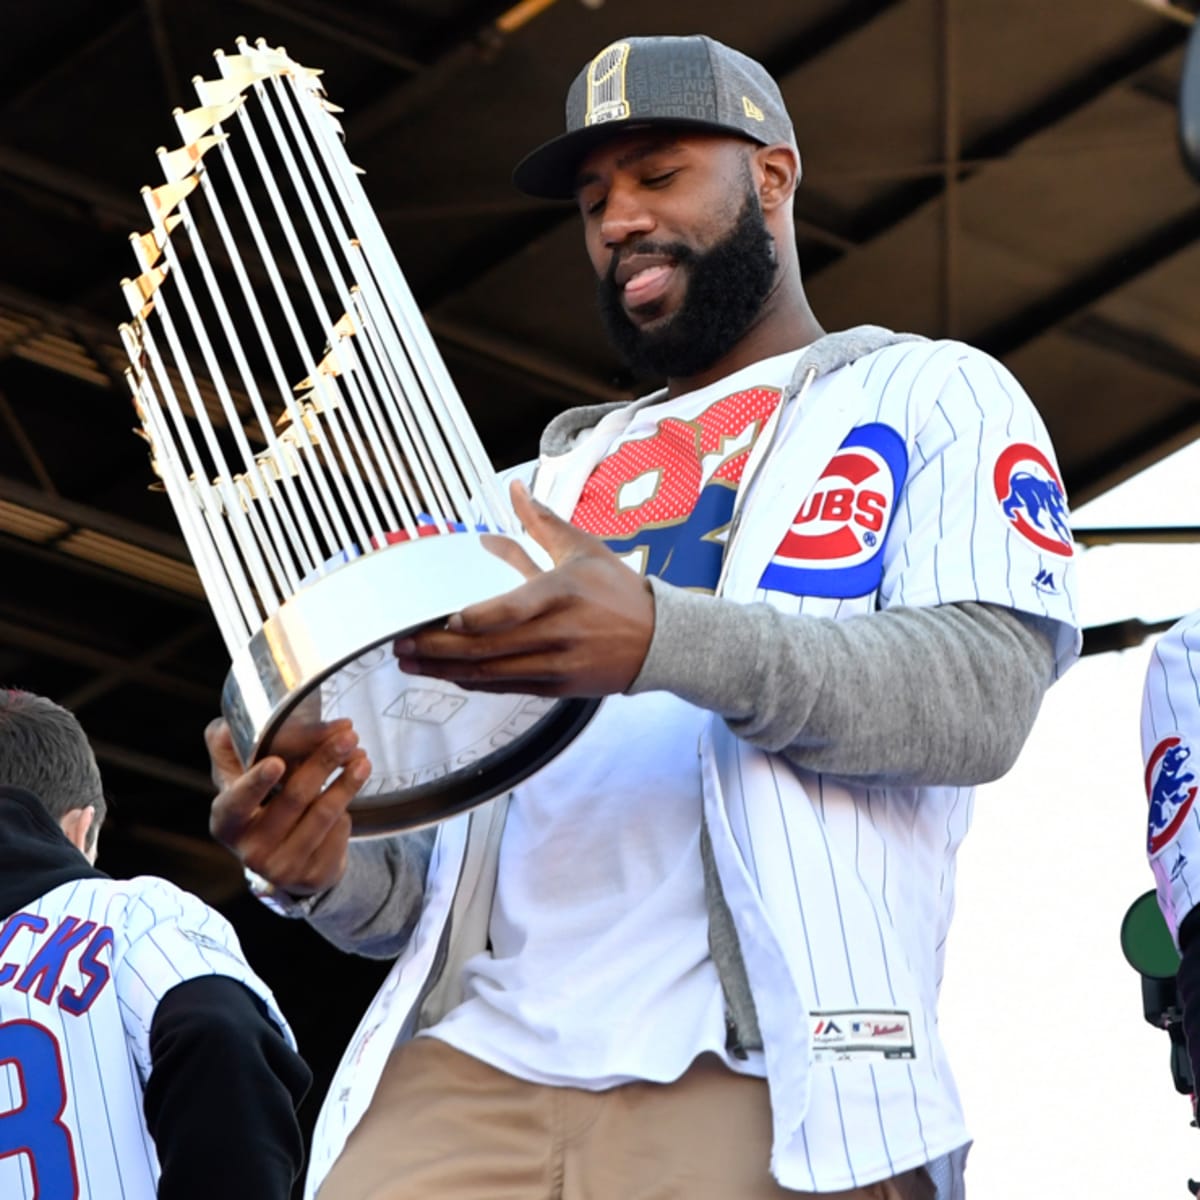 Jason Heyward: Chicago Cubs OF giving back to the game